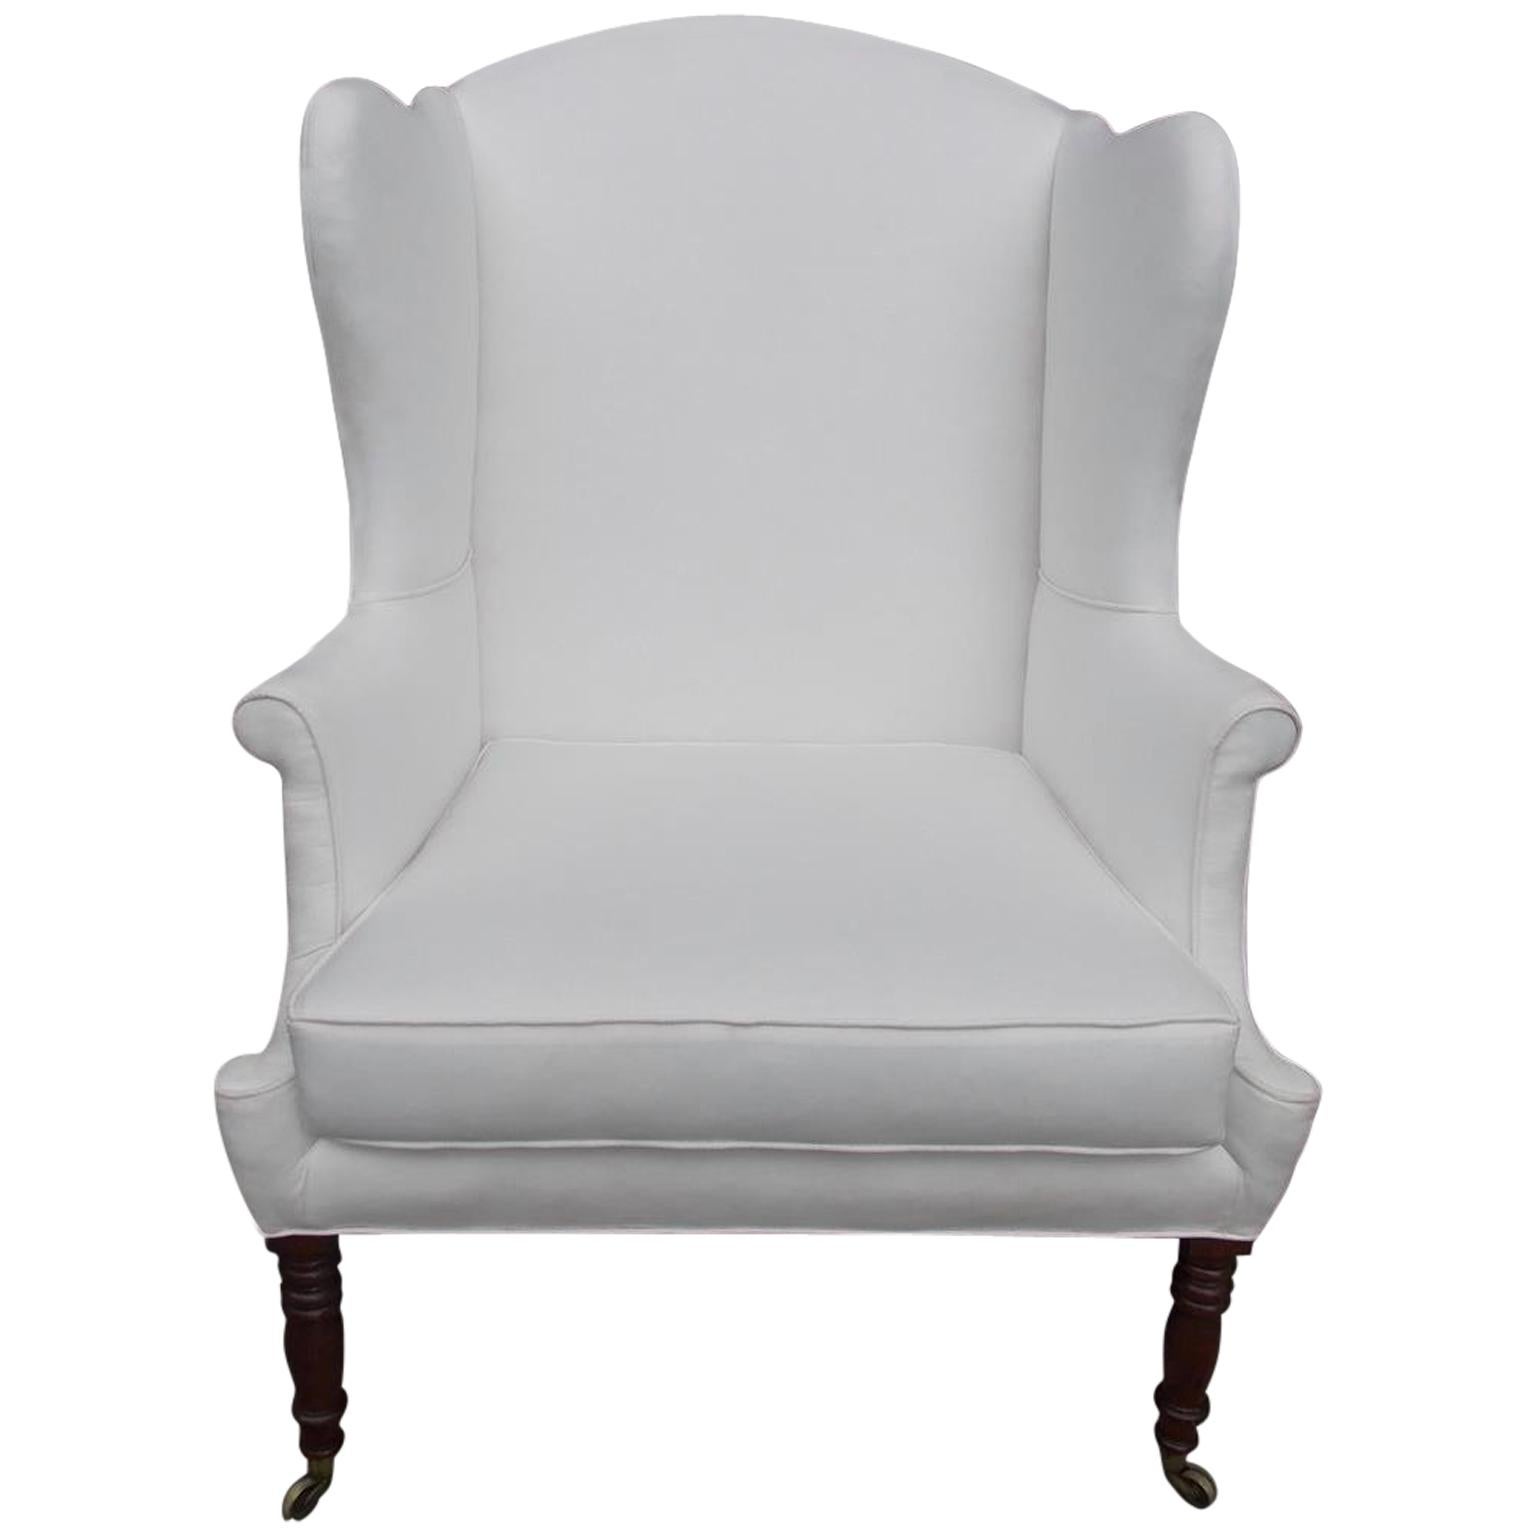 American Sheraton Southern Cherry Upholstered Wingback Chair, Circa 1815